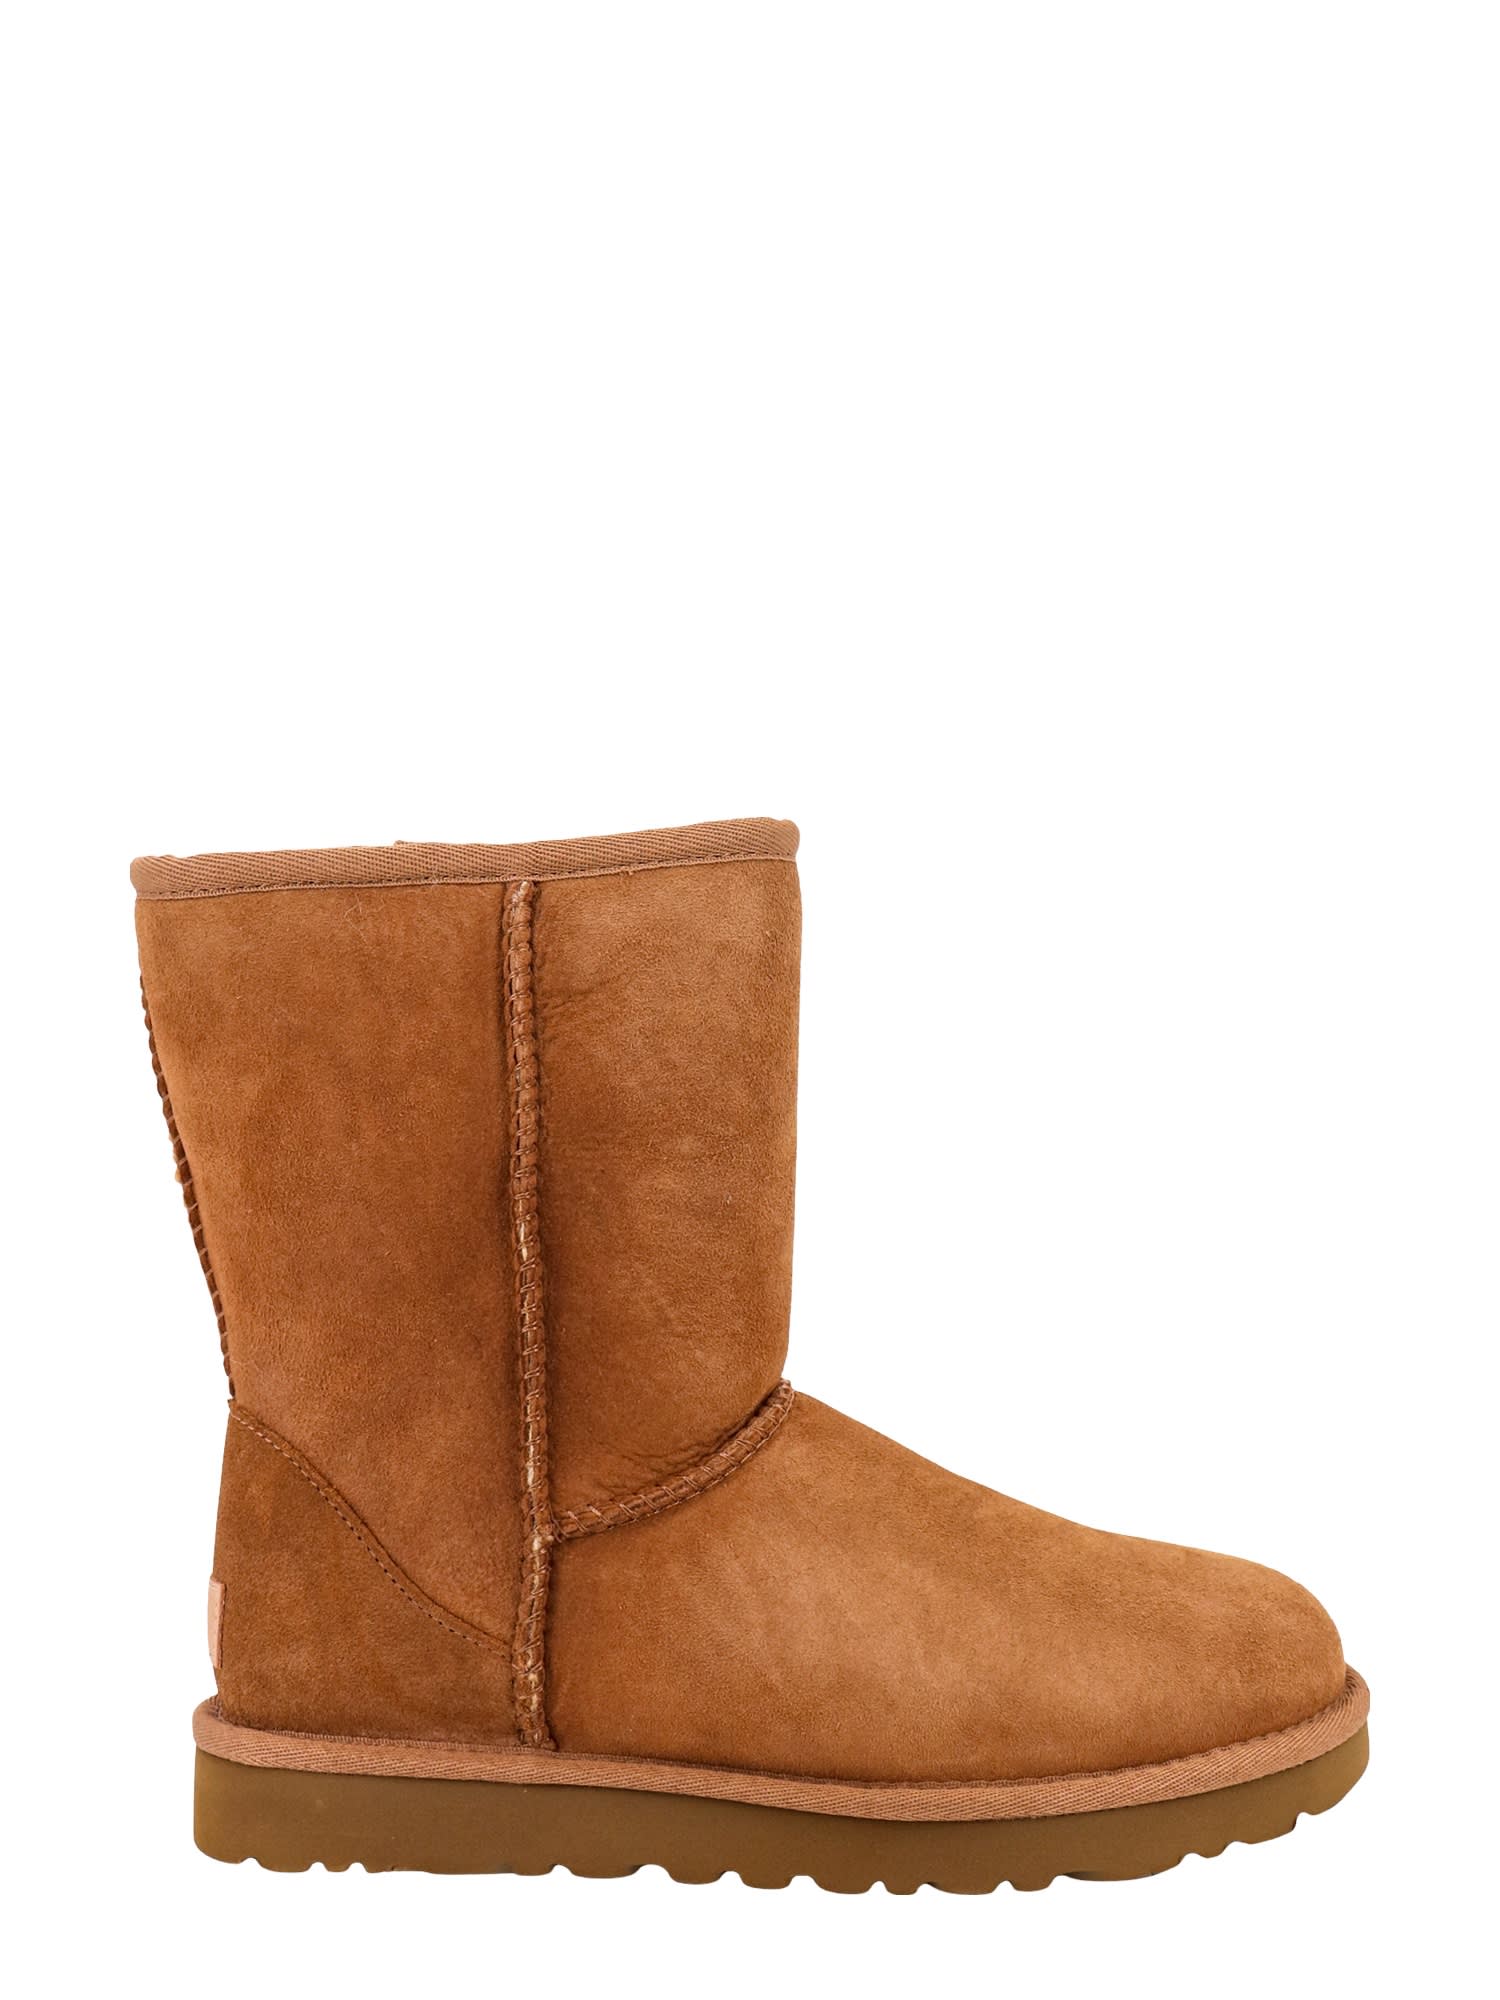 Shop Ugg Classic Short Ankle Boots In Beige